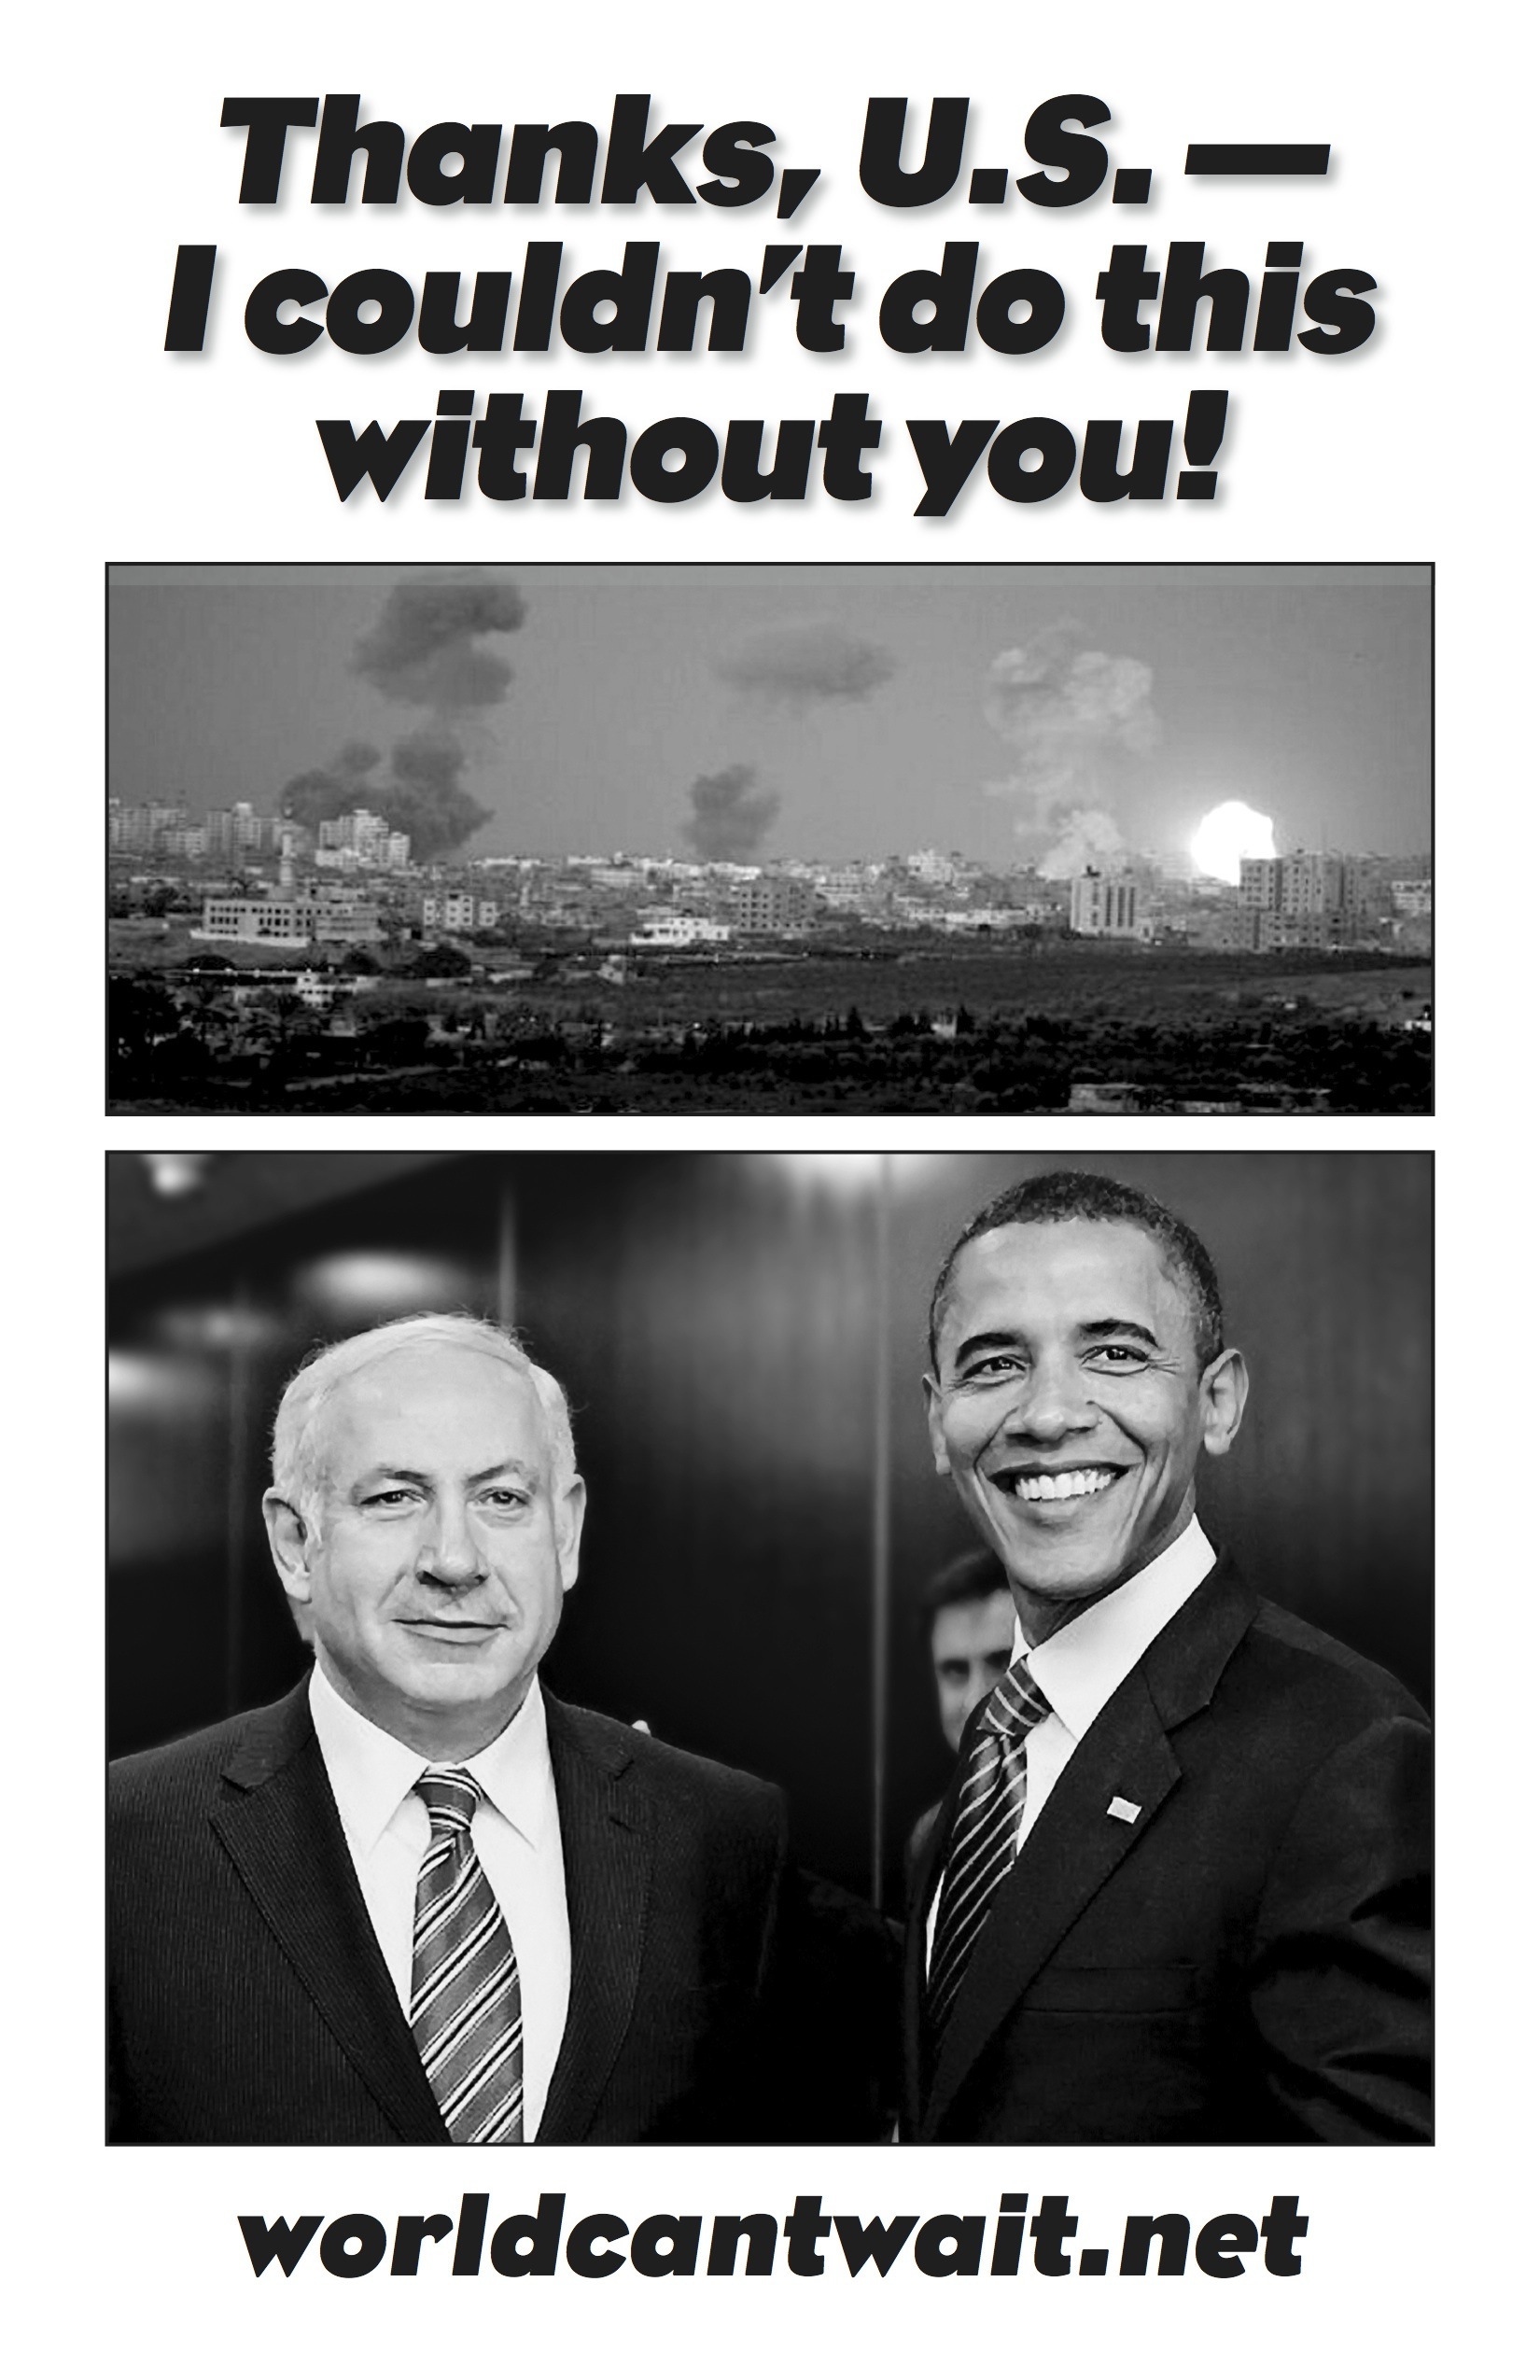 Can't Do it Without You, U.S.! - from Netanyahu